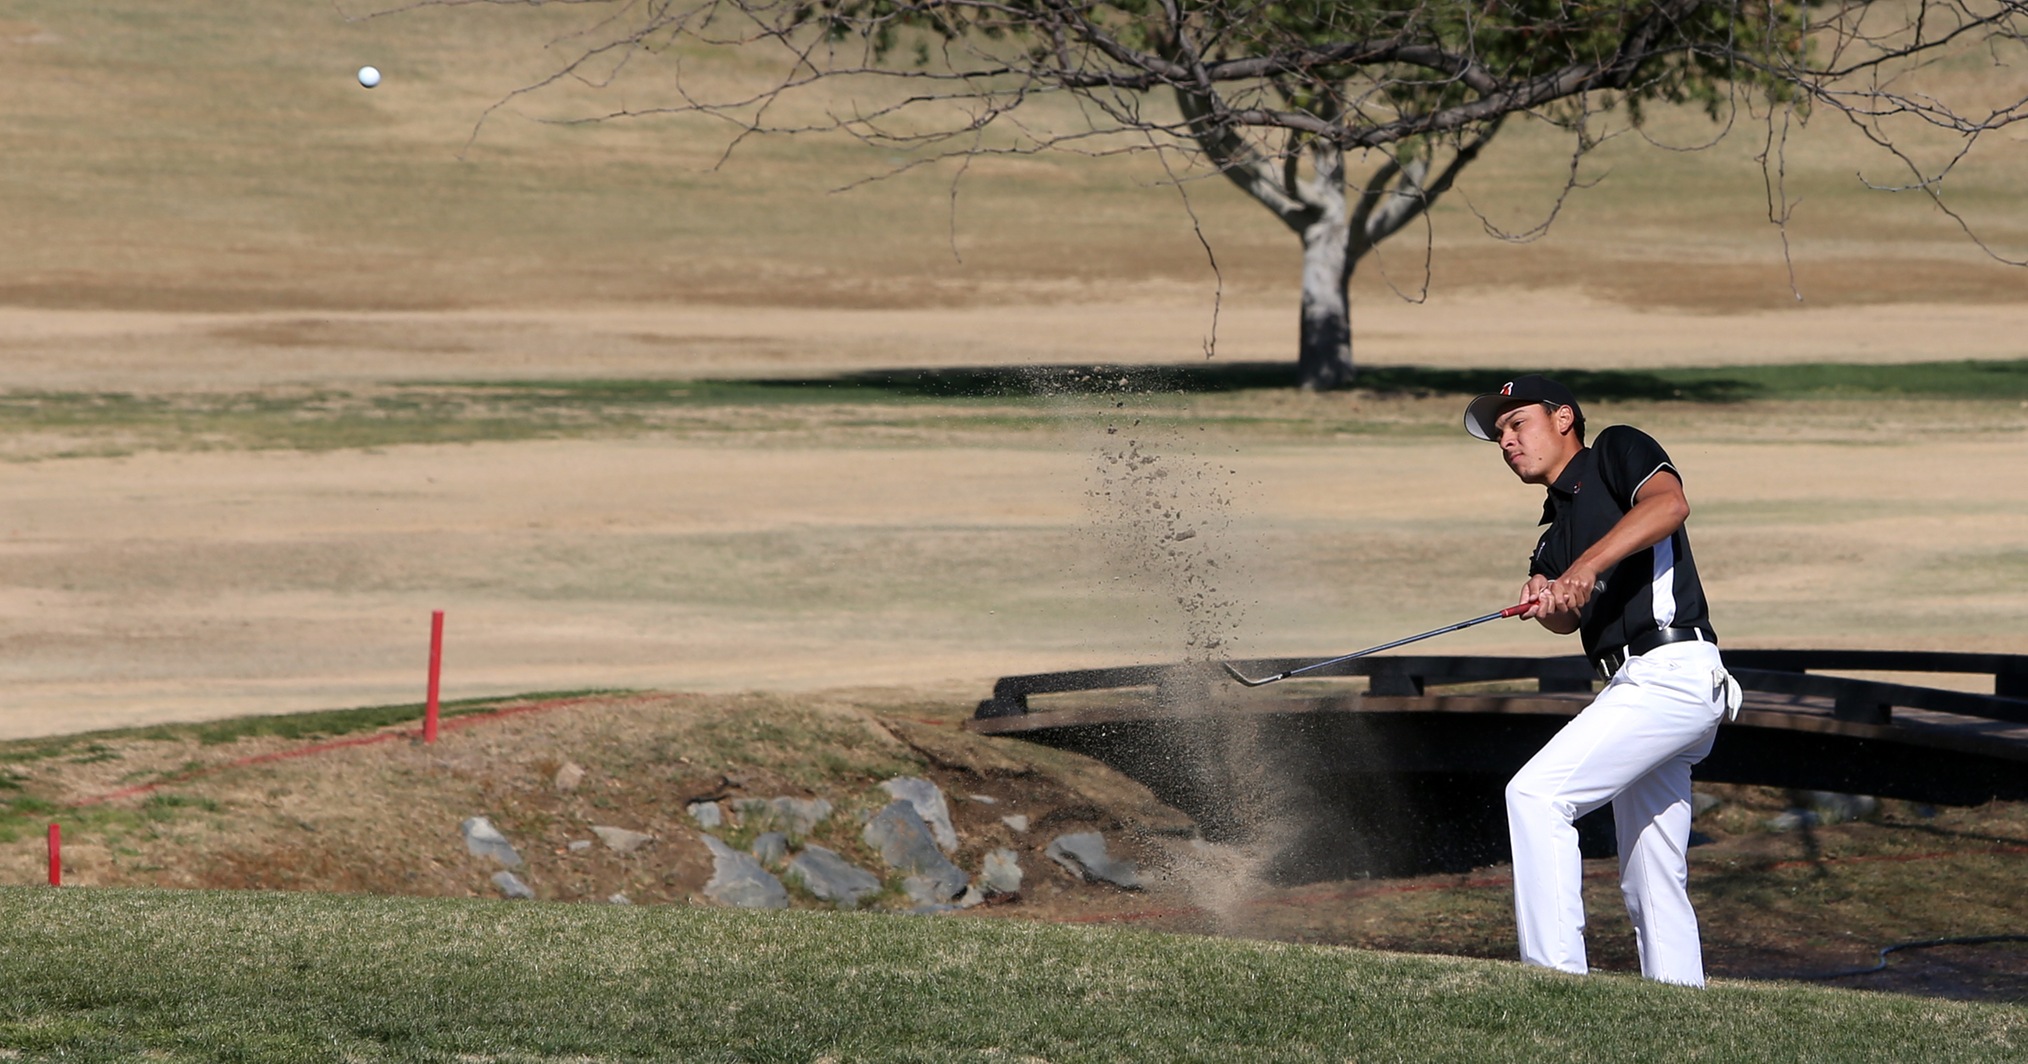 Michael Herrera works his way out of the sand at the Victoria Club during his round at the Riverside Invitational. He finished with a 73. (Photo by Bobby R. Hester)